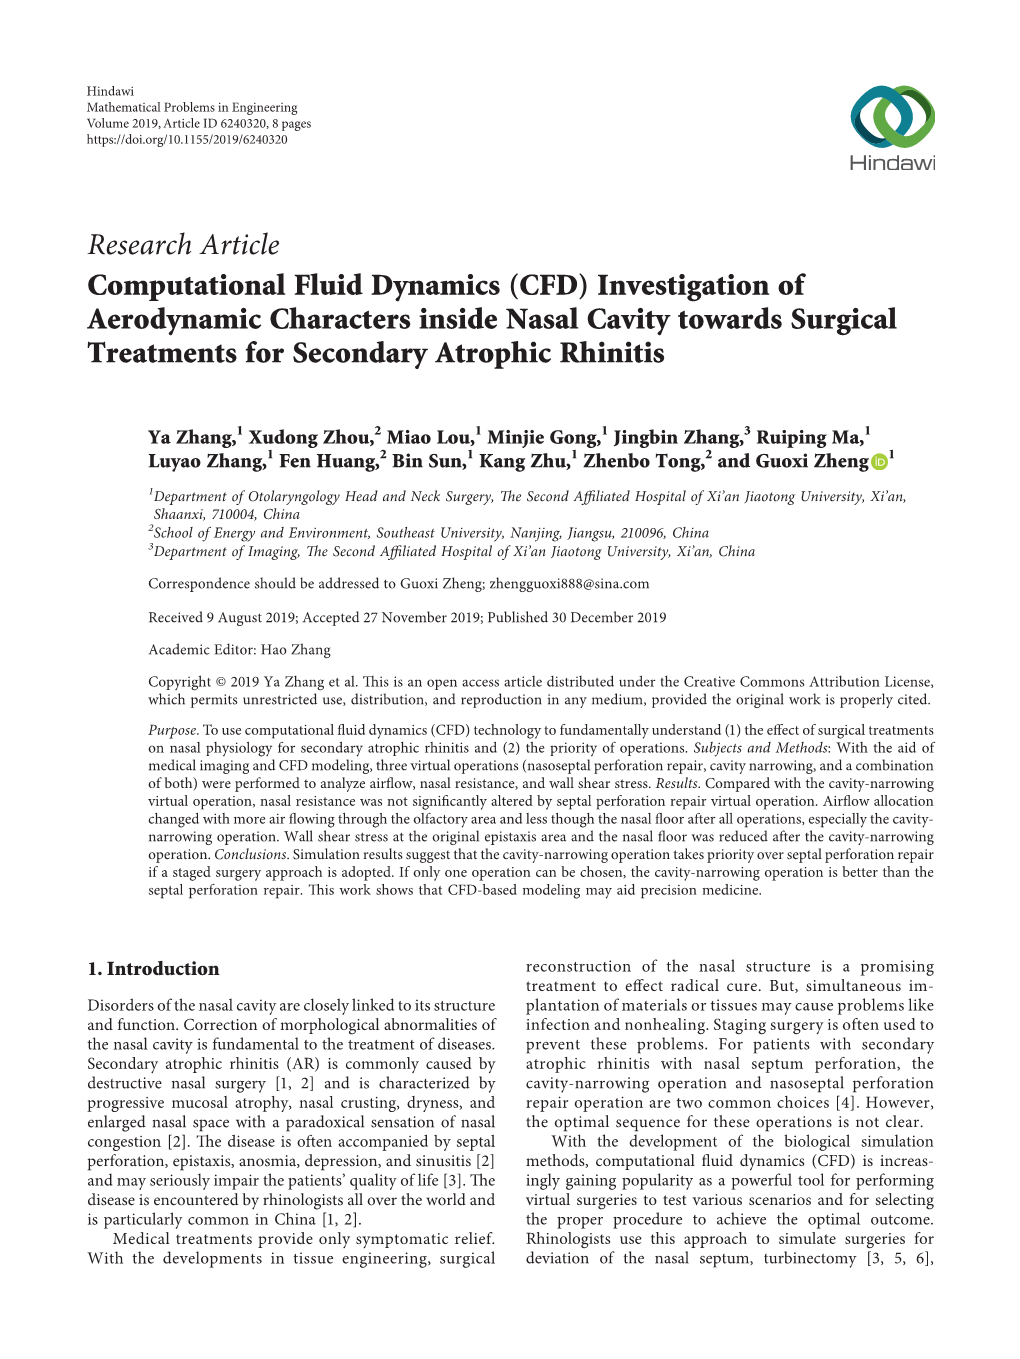 Computational Fluid Dynamics (CFD) Investigation of Aerodynamic Characters Inside Nasal Cavity Towards Surgical Treatments for Secondary Atrophic Rhinitis